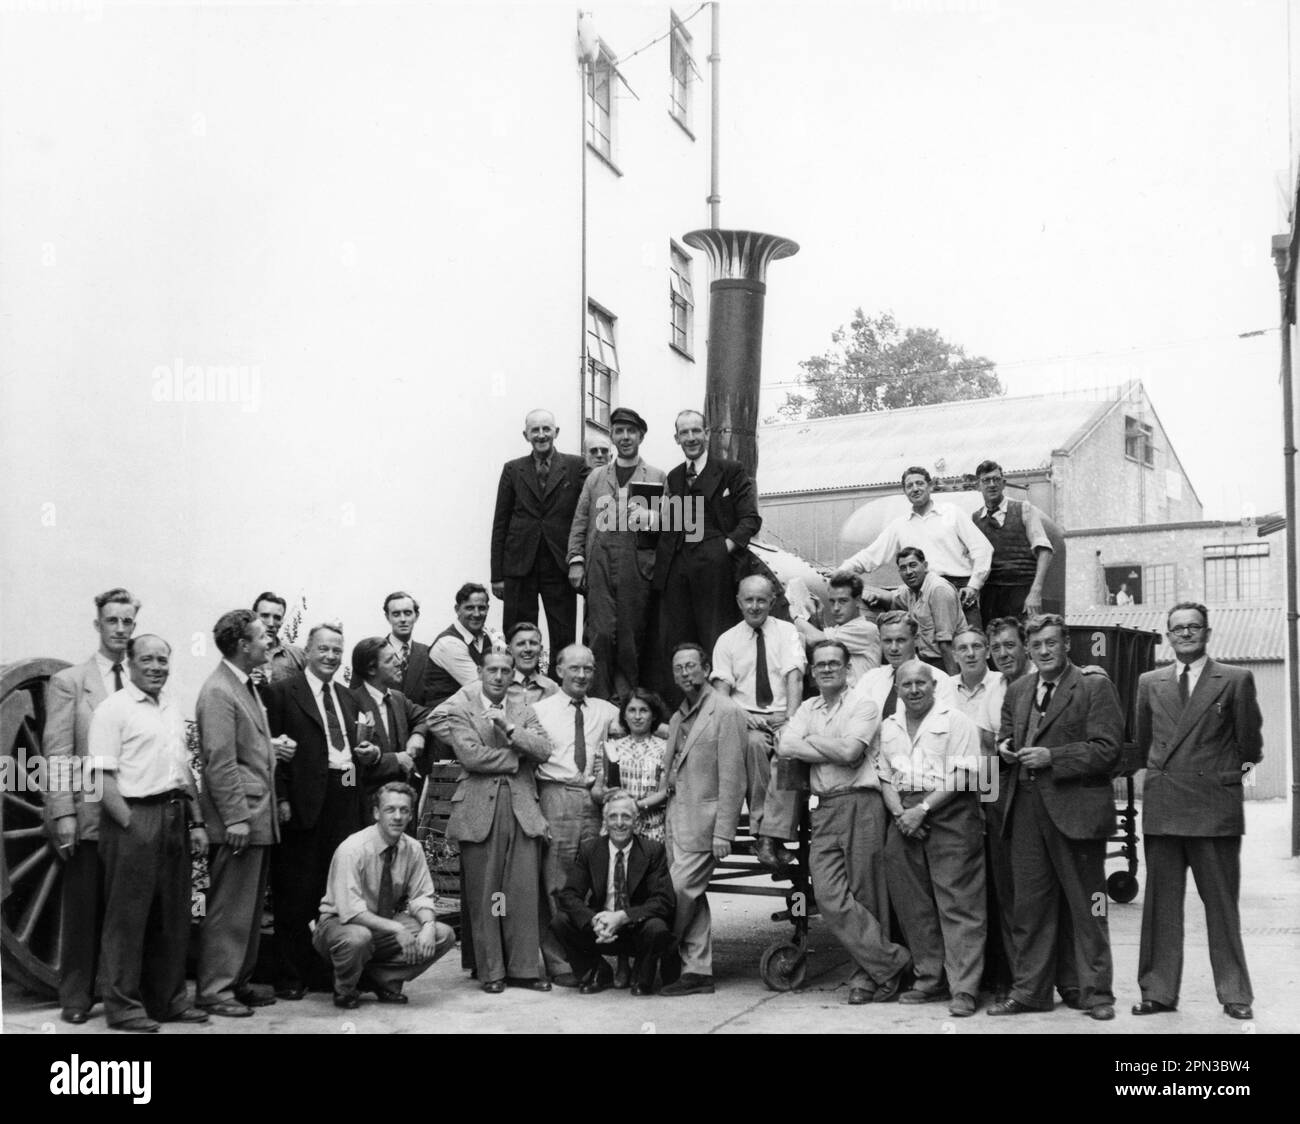 Director CHARLES CRICHTON (6th from left standing) and Film Crew at Ealing Studios with the genuine 1838 steam locomotive Lion used in THE TITFIELD THUNDERBOLT 1953 director CHARLES CRICHTON original screenplay T.E.B. Clarke music Georges Auric producer Michael Truman An Ealing Studios Michael Balcon Production / General Film Distributors (GFD) Stock Photo